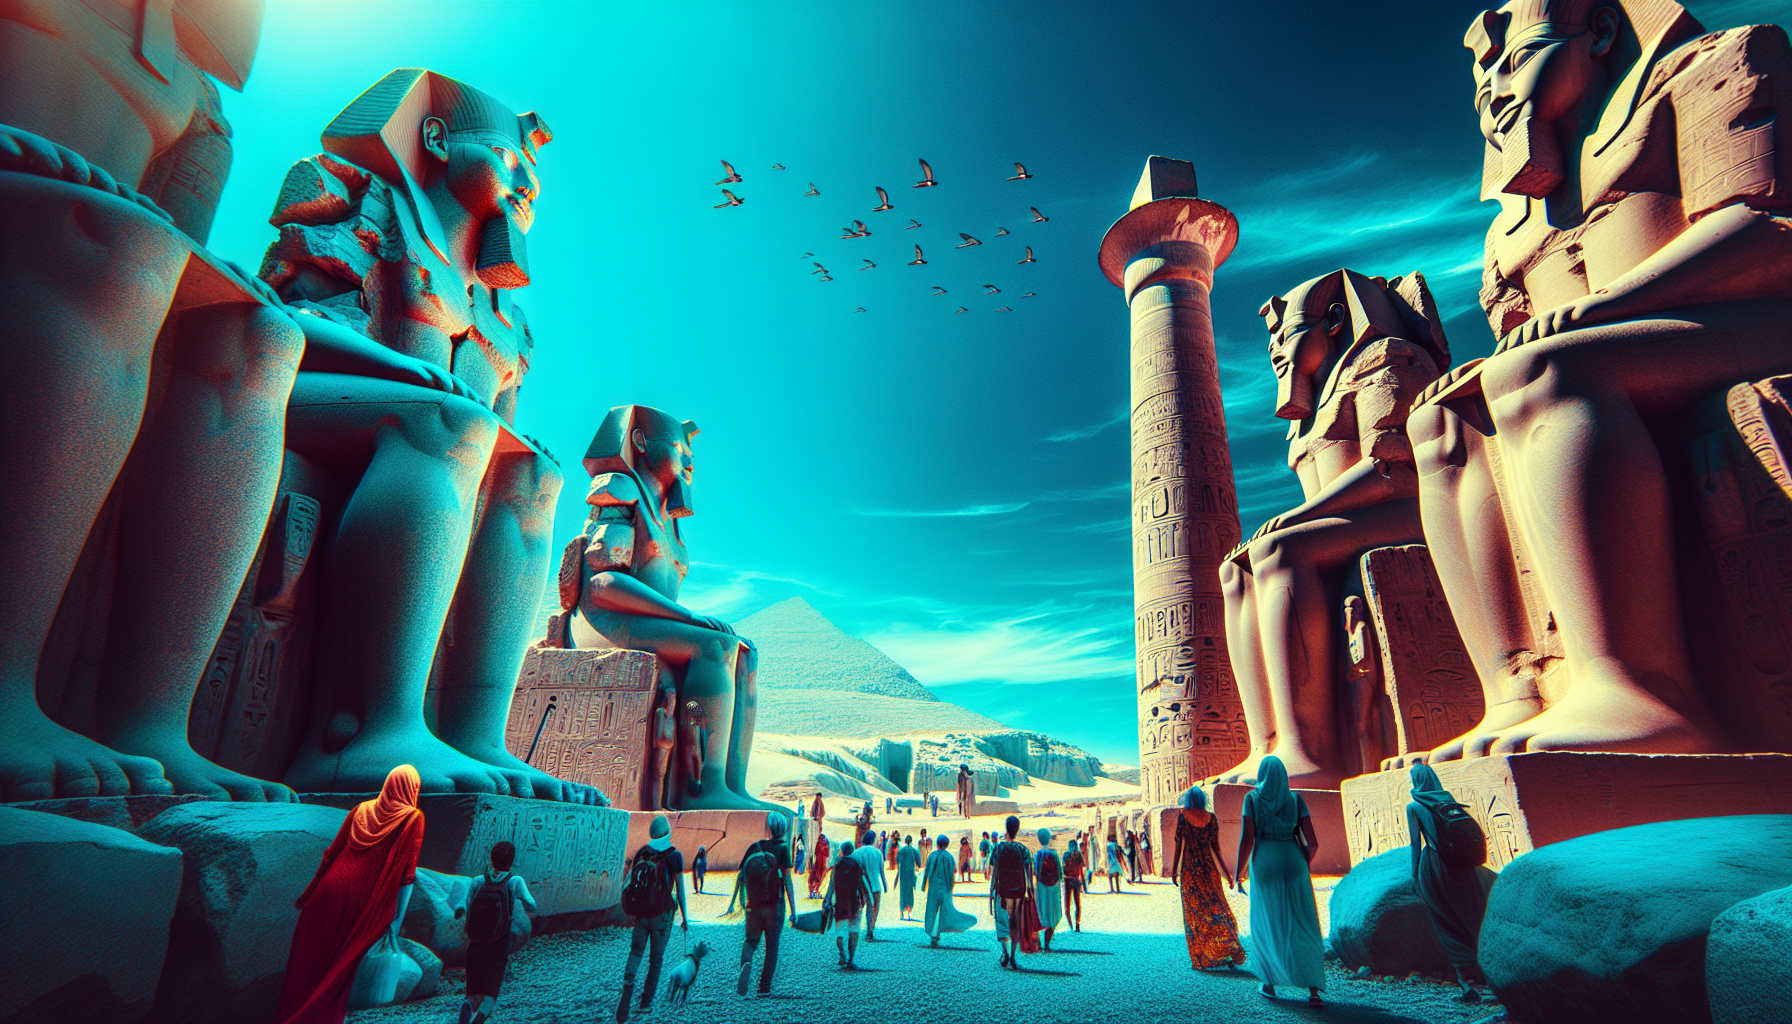 explore the colossal statues of memnon and gain a new perspective on ancient history with this engaging article.